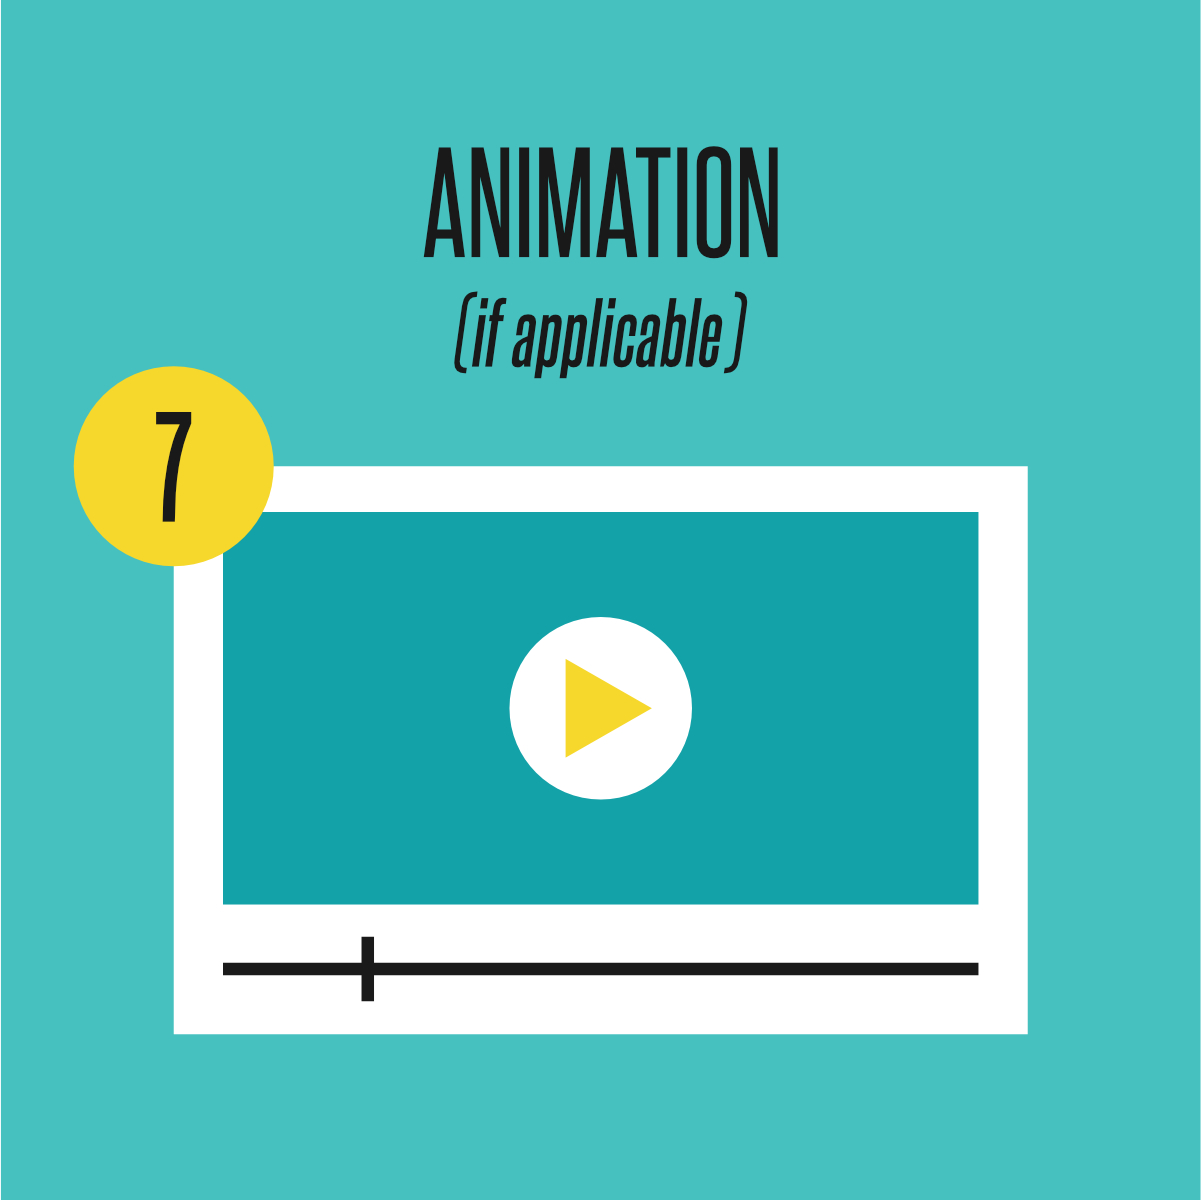 Using CSS3 Transitions for Smooth Animations, by Fran Dios, The Web Tub